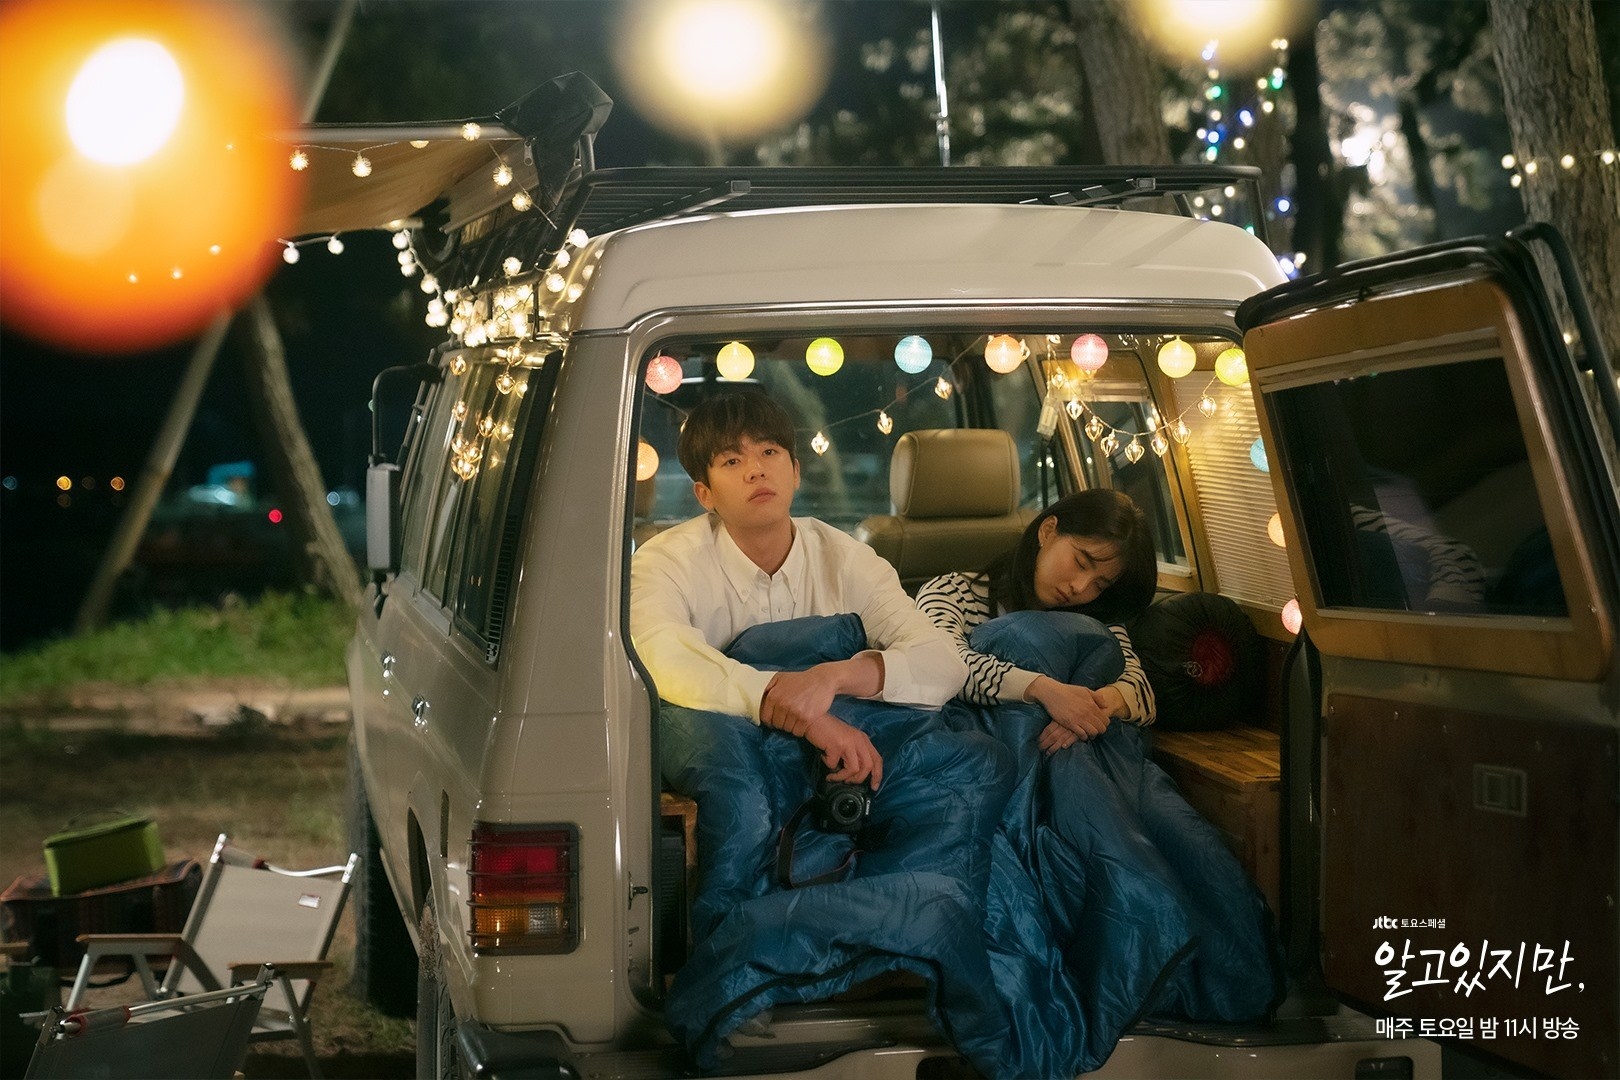 Do-hyeok and Na-bi in the back of a van at night covered in a blanket. Do-hyeok is leaning forward with a camera in his hands while Na-bi is asleep next to him